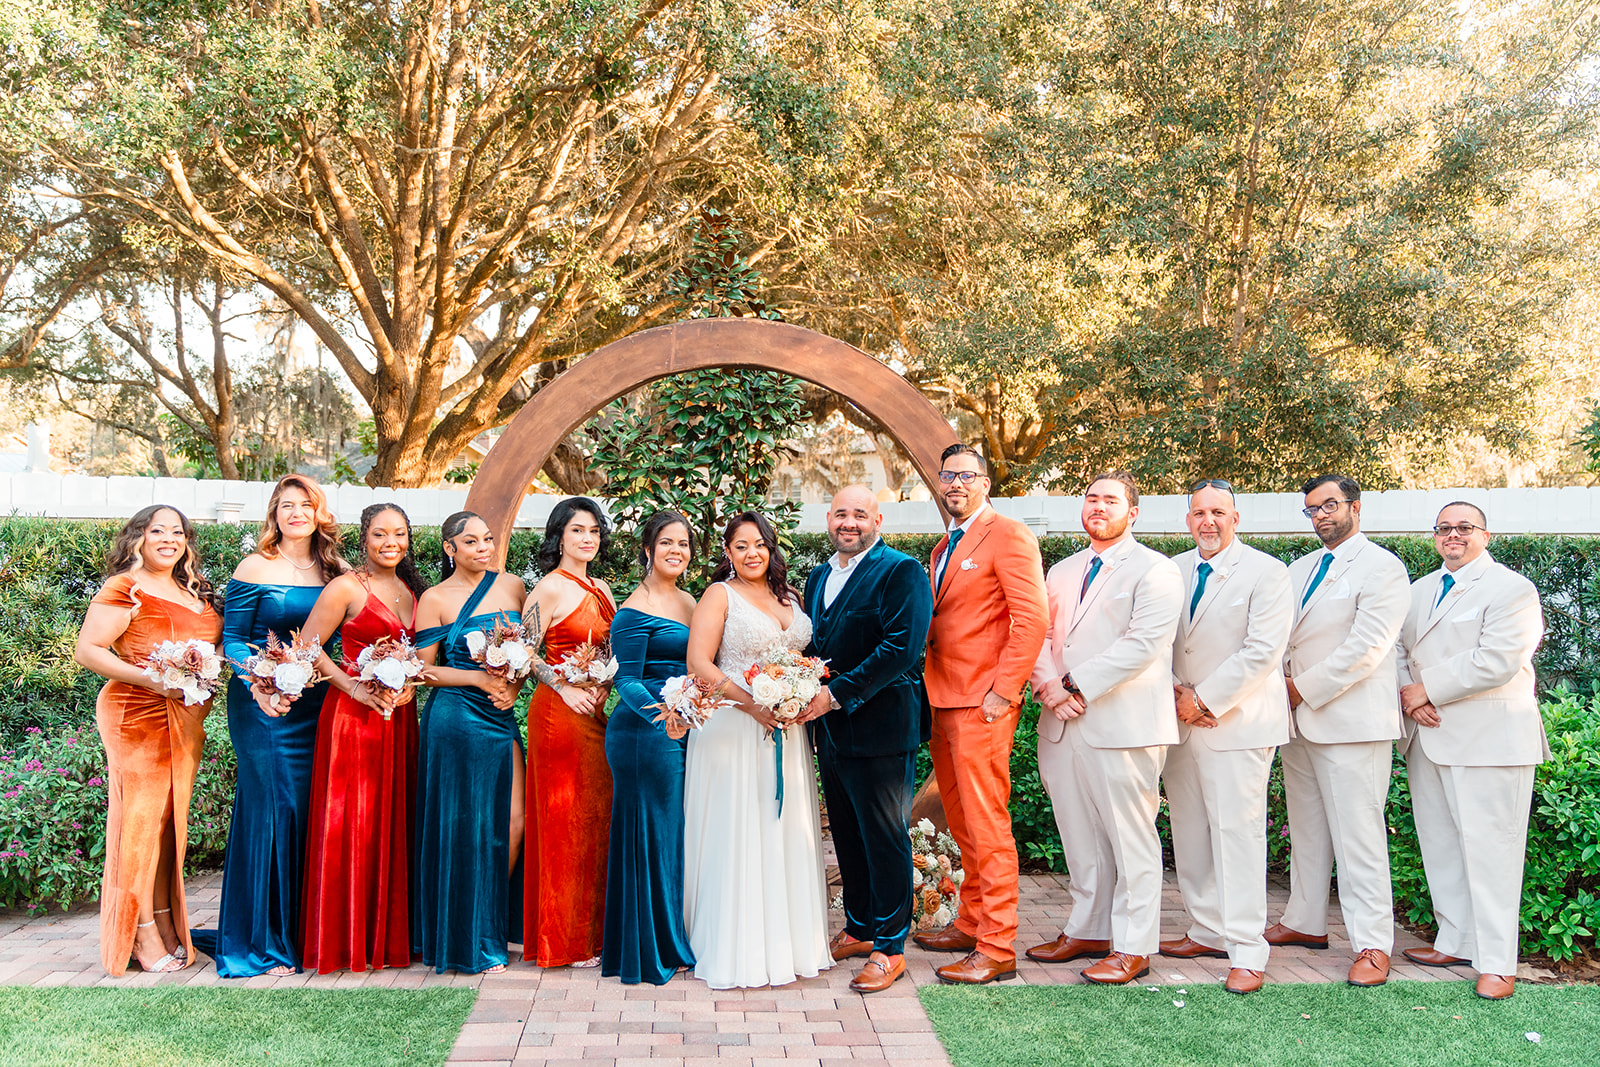 Margaux and Alberto with the bridal party posing at the outdoor altar of Venue 1902 for a classic wedding pose, captured by Jerzy Nieves Photography.